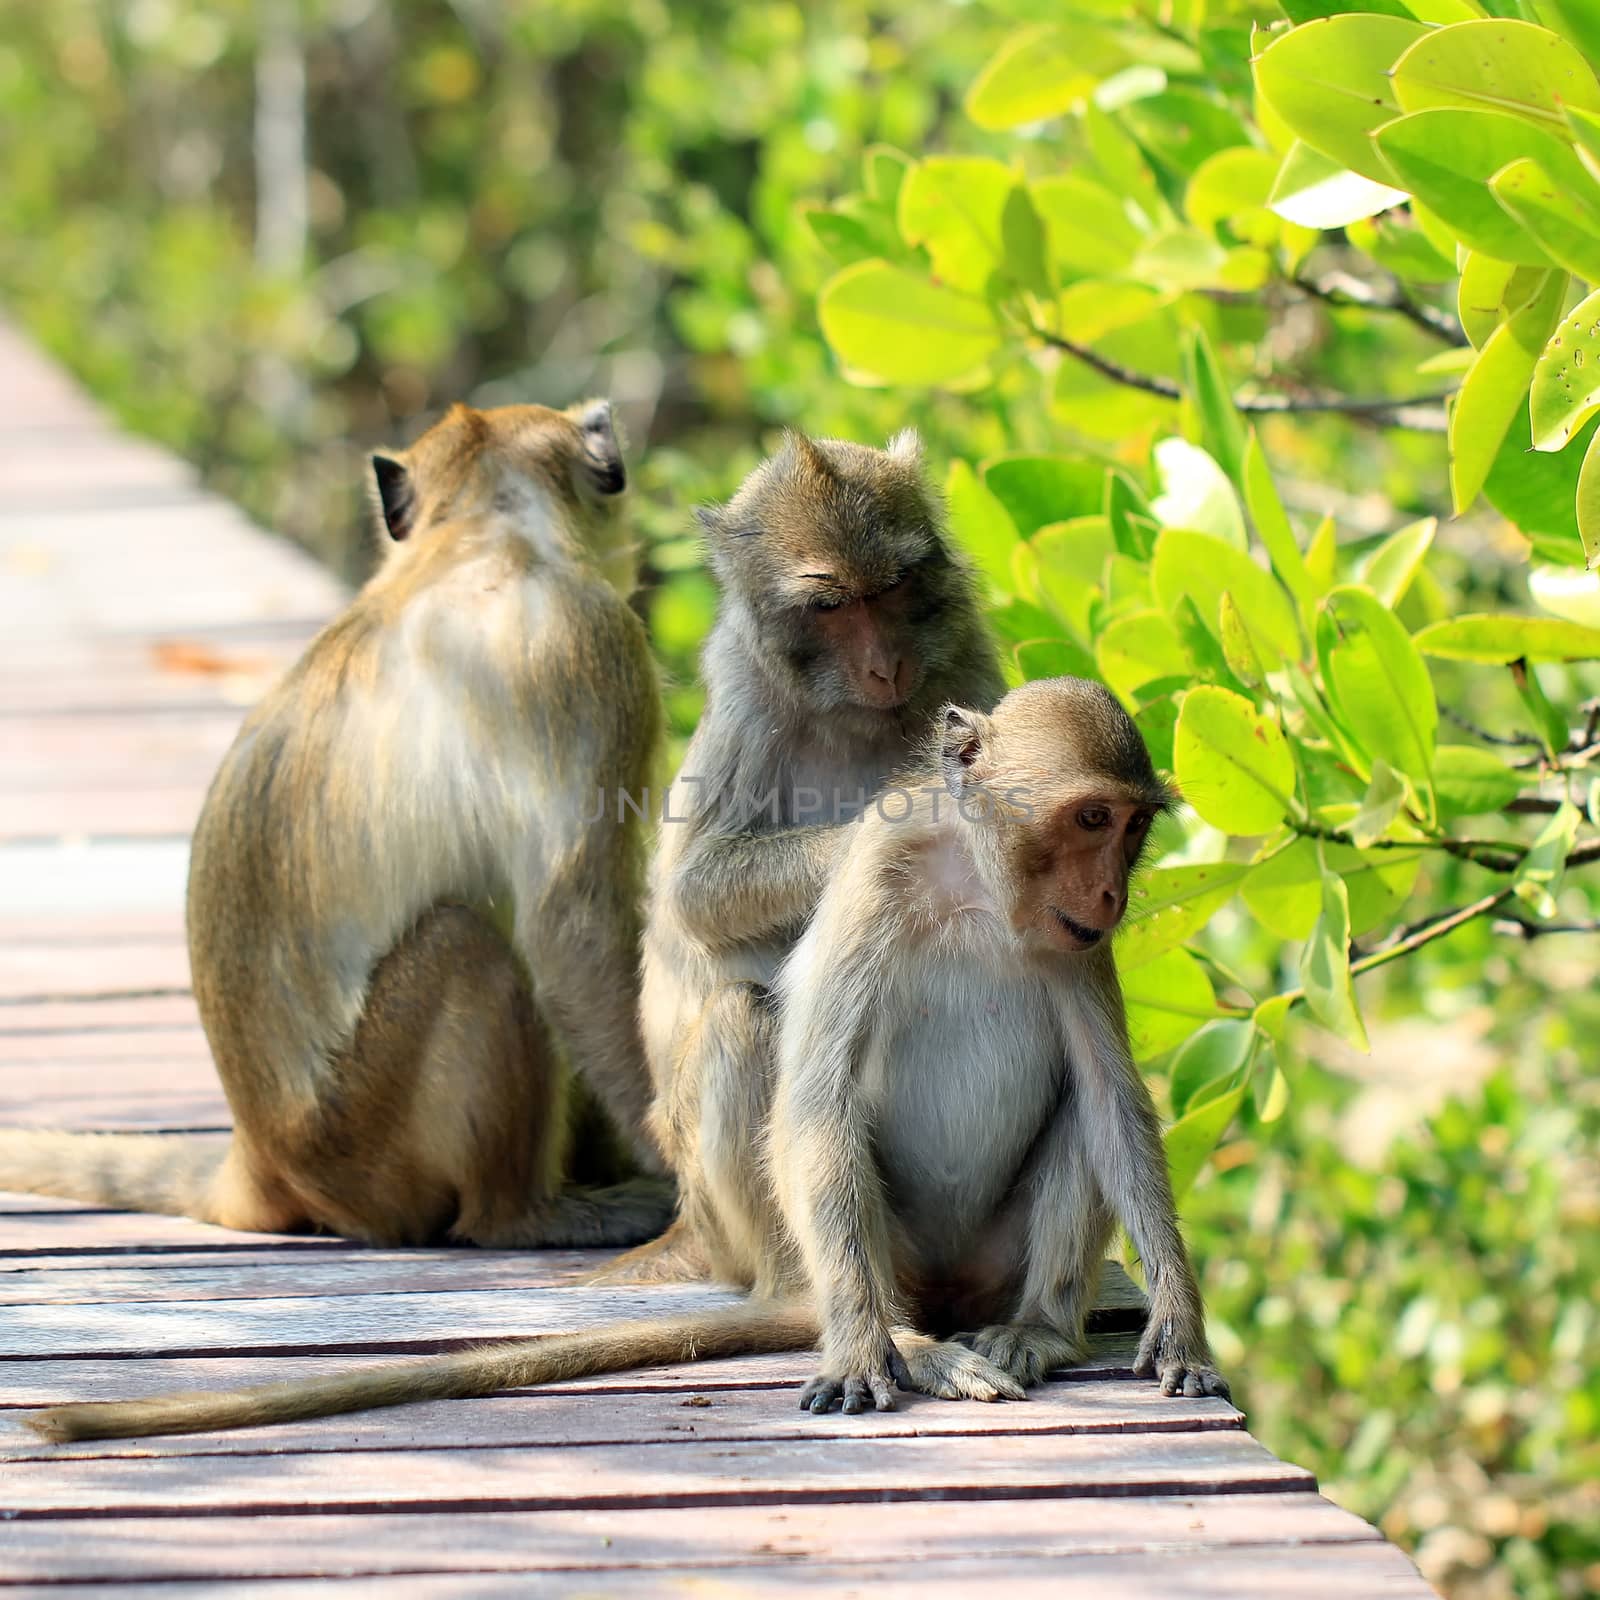 monkey family in nature by leisuretime70